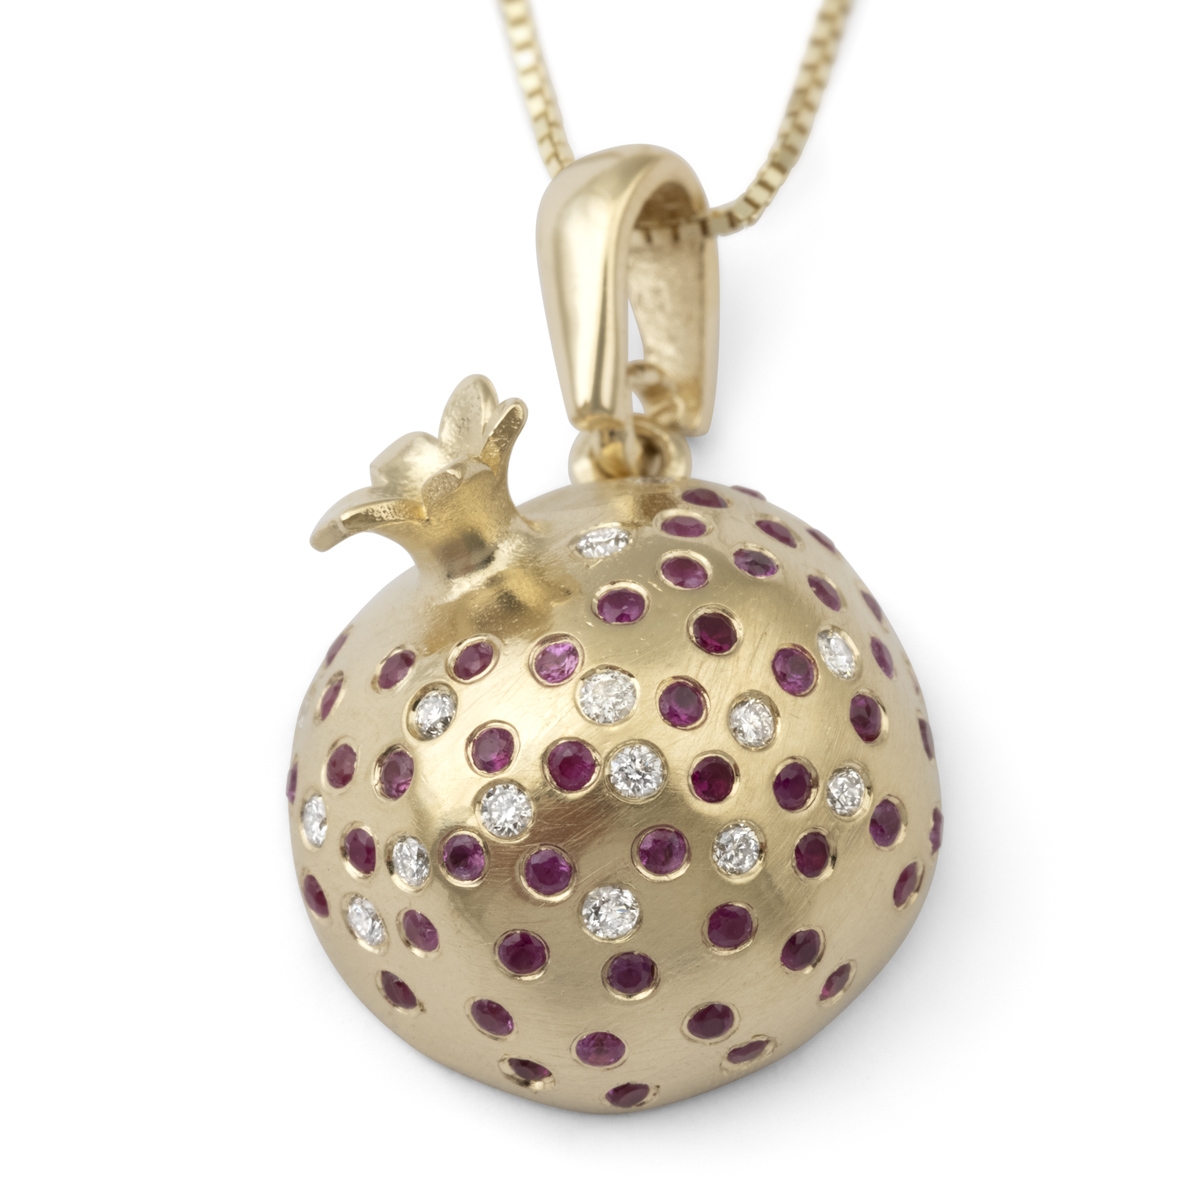 Three-Dimensional 14K Yellow Gold Pomegranate Pendant Necklace With White Diamonds and Ruby Stones - 1